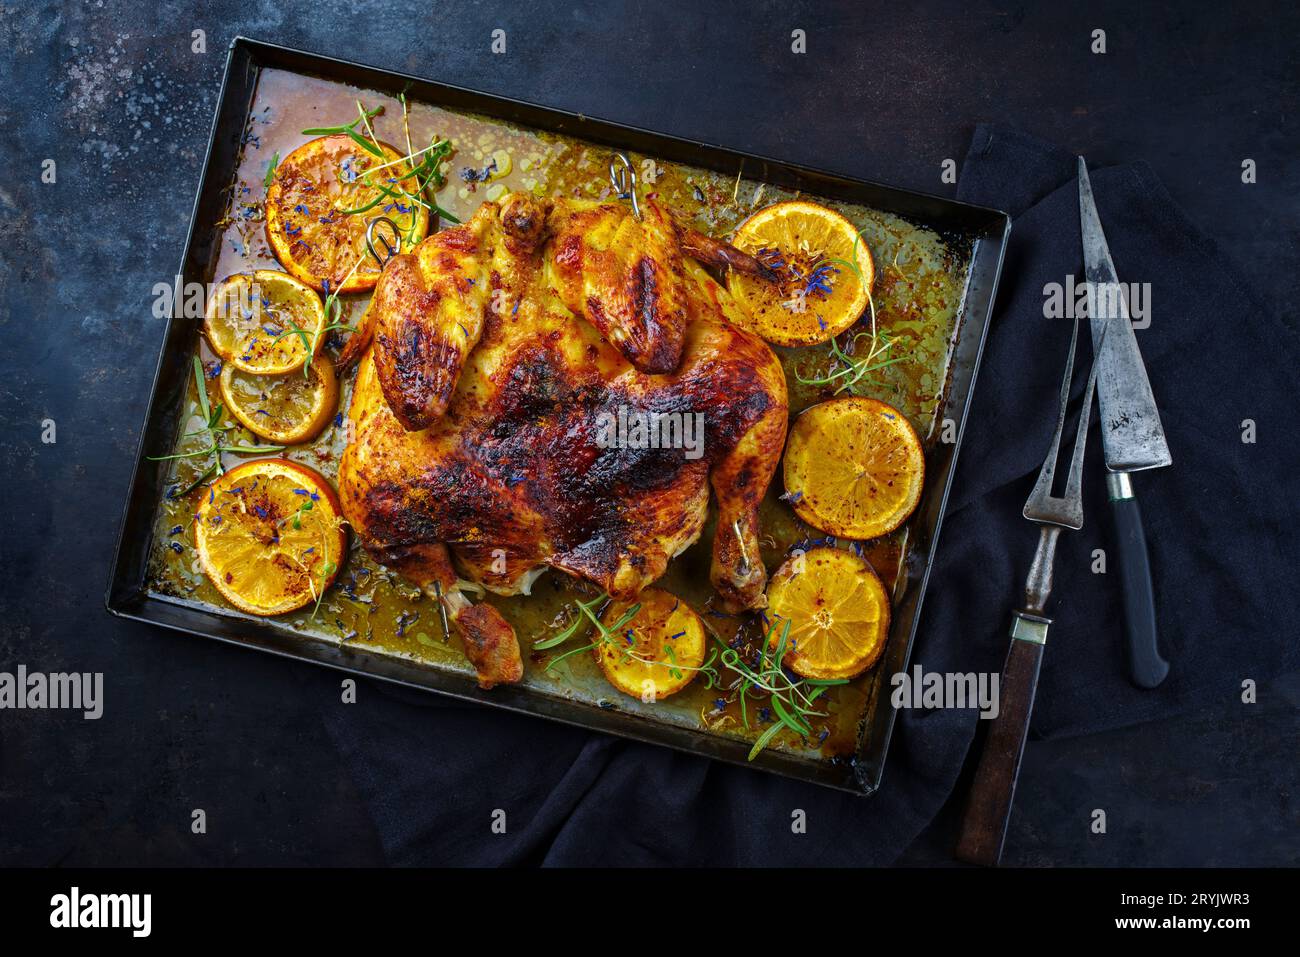 Traditional barbecue spatchcocked chicken al mattone chili with orange slices and herbs served as top view on an old rustic meta Stock Photo